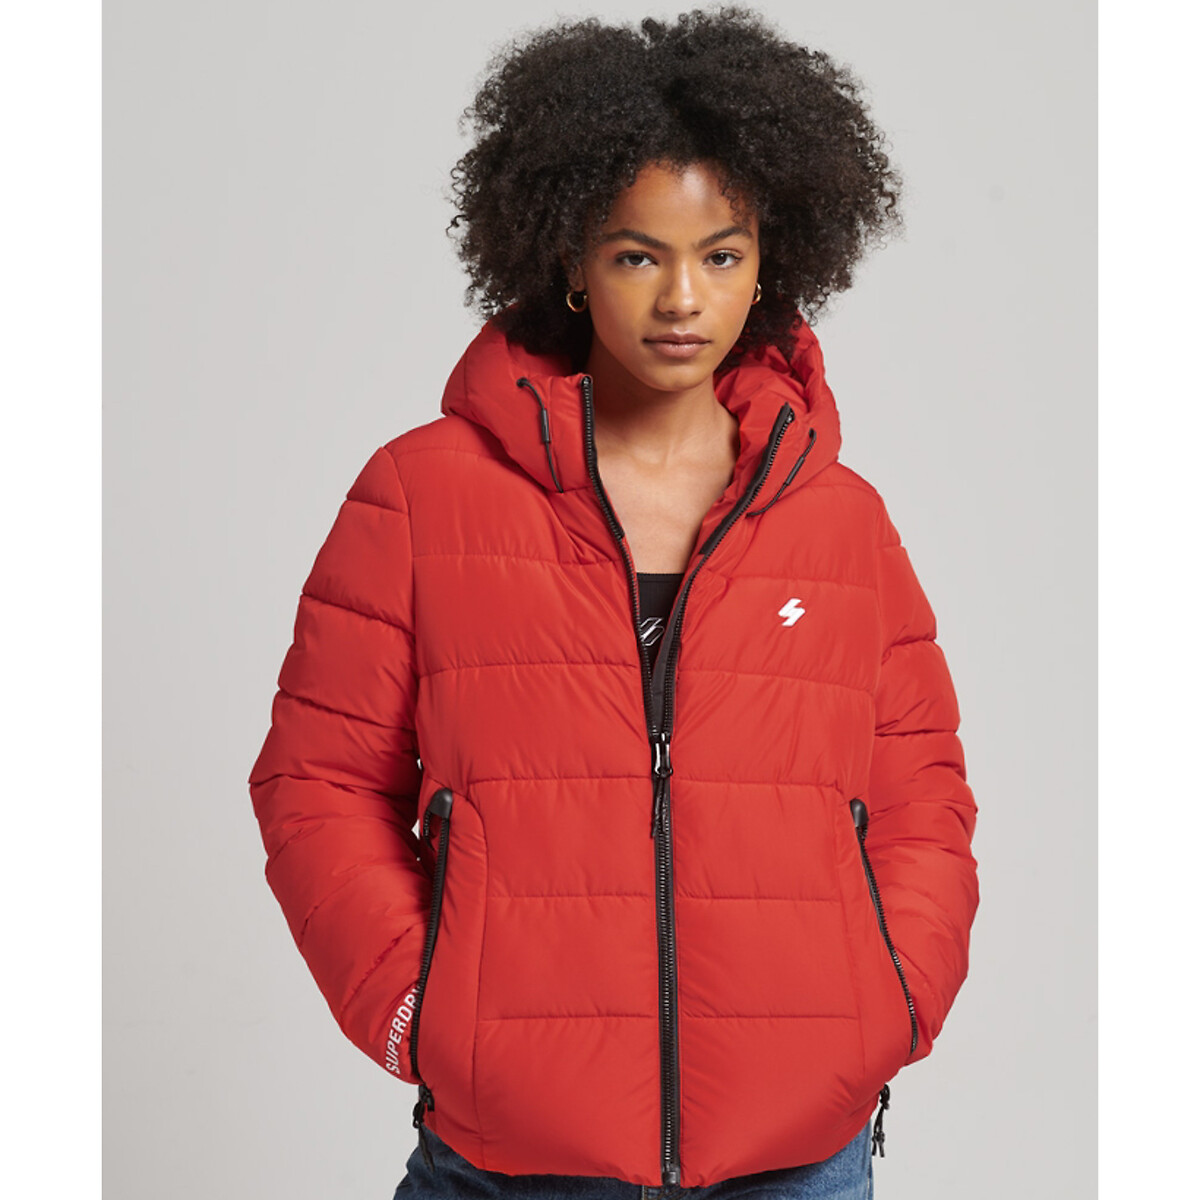 Casaco Superdry Sports Bomber mulher